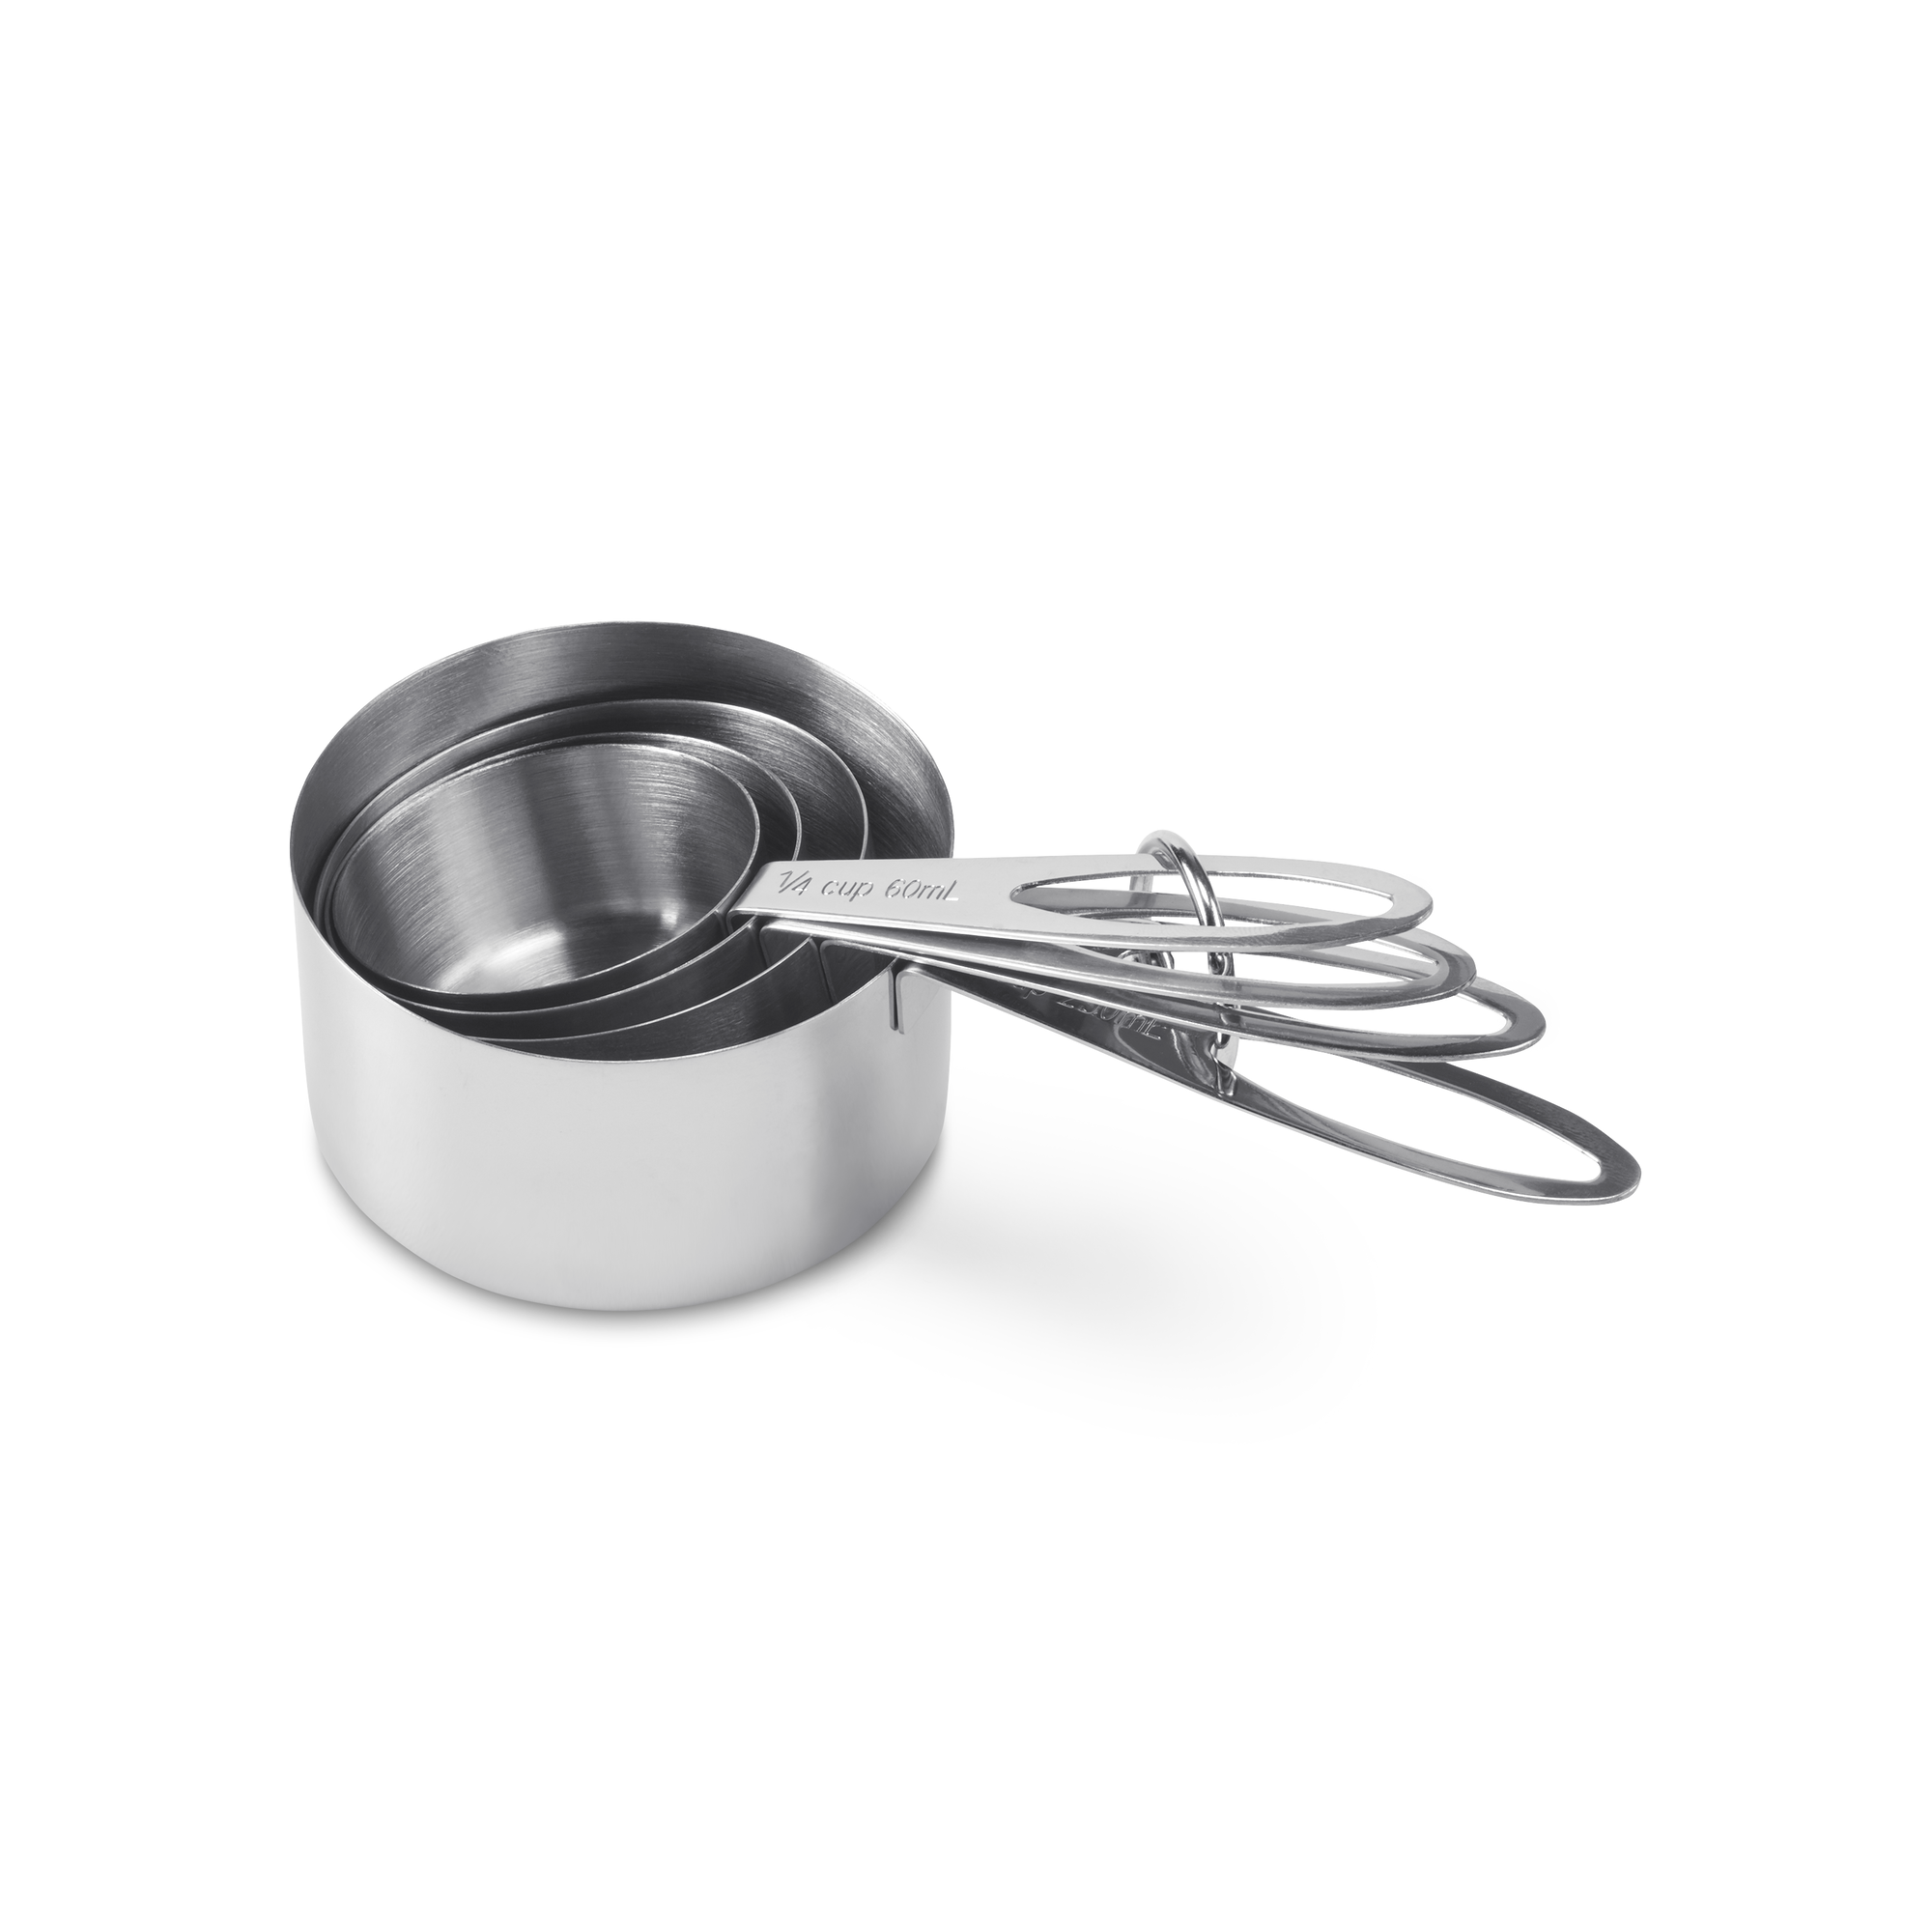 Stainless Steel Measuring Cups Set of 7 Stackable Heavy Duty